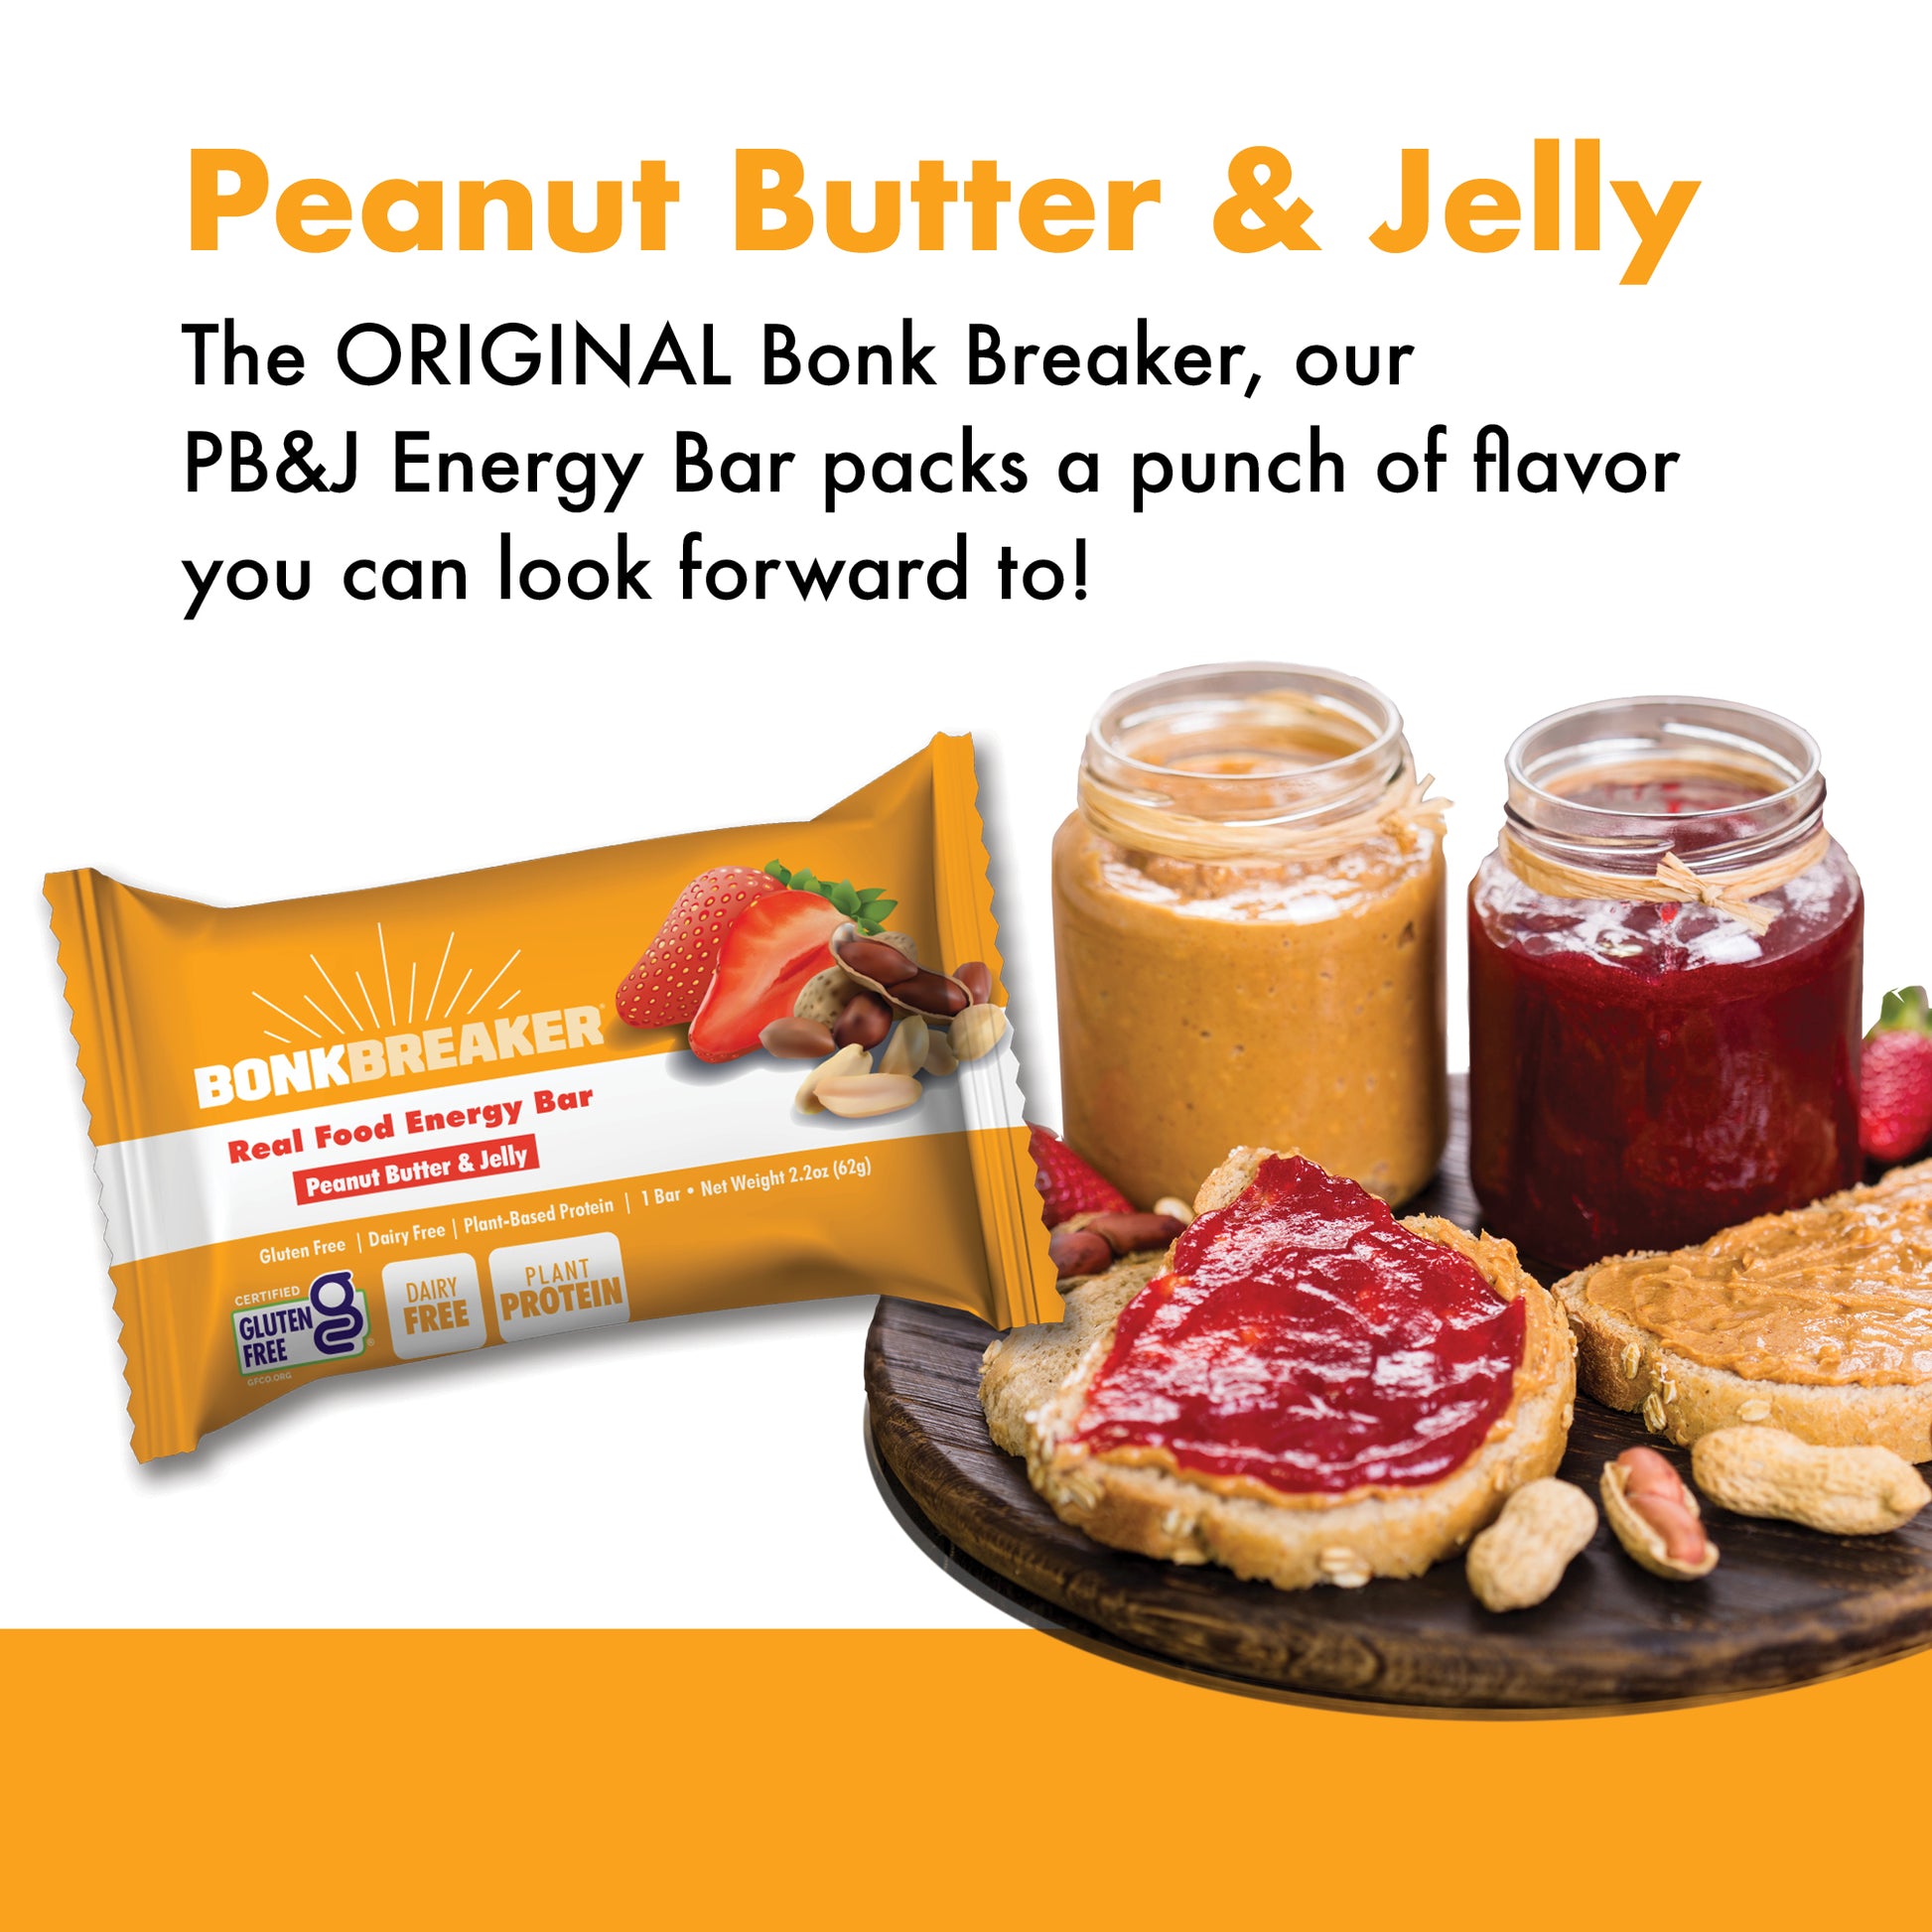 Peanut Butter & Jelly - The ORIGINAL Bonk Breaker, our PB&J Energy Bar packs a bunch of flavor you can look forward to.